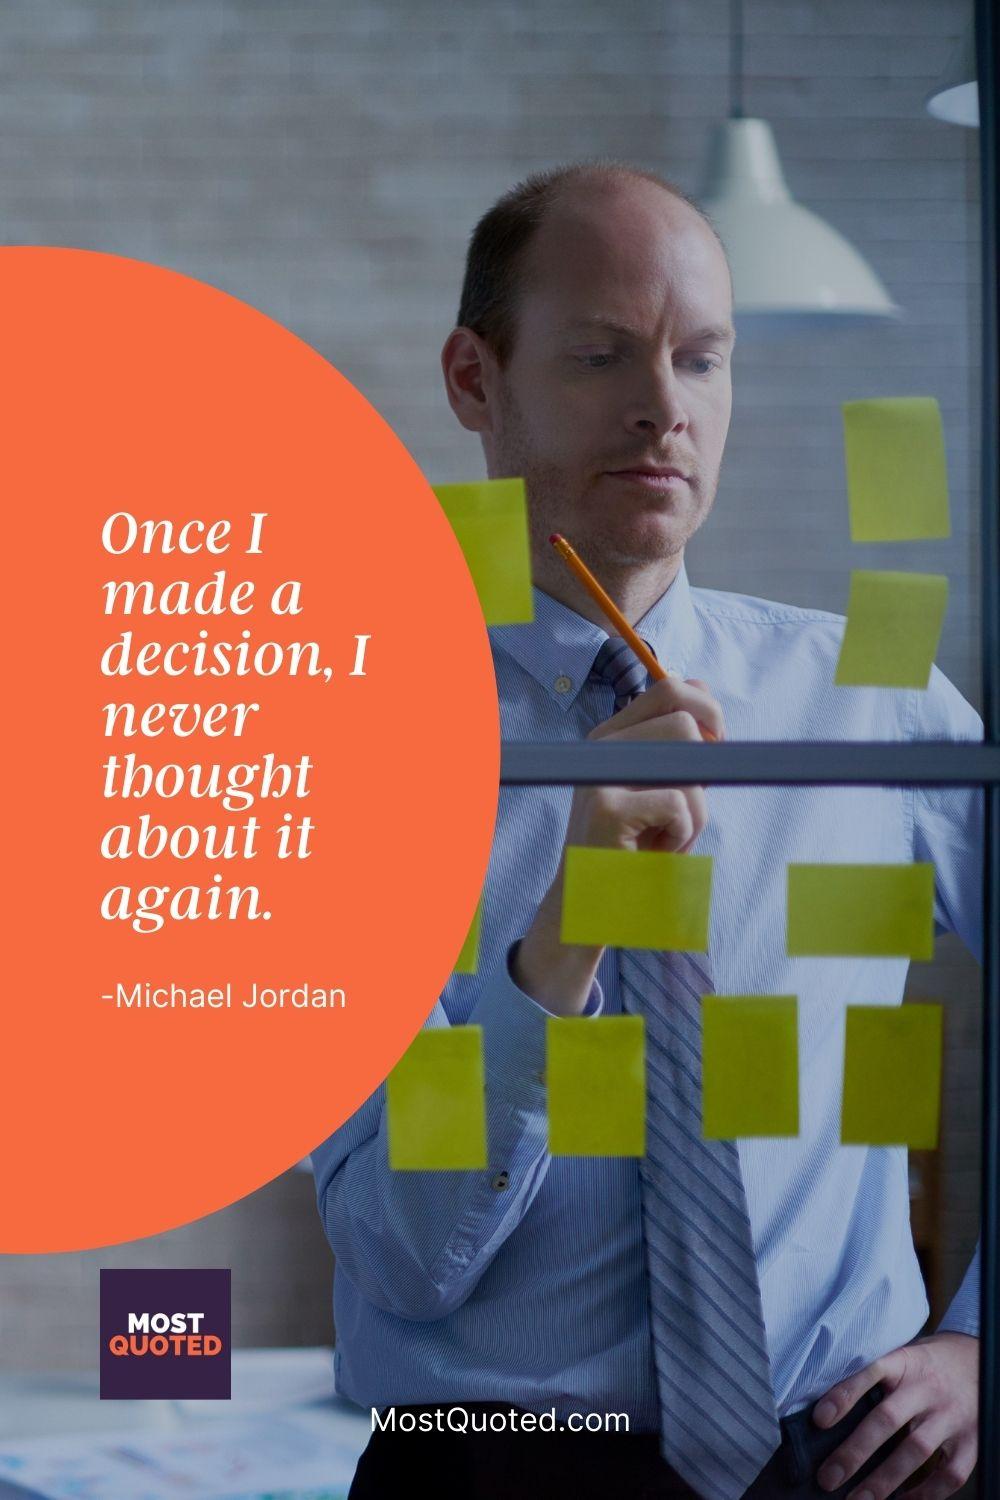 Once I made a decision, I never thought about it again. - Michael Jordan